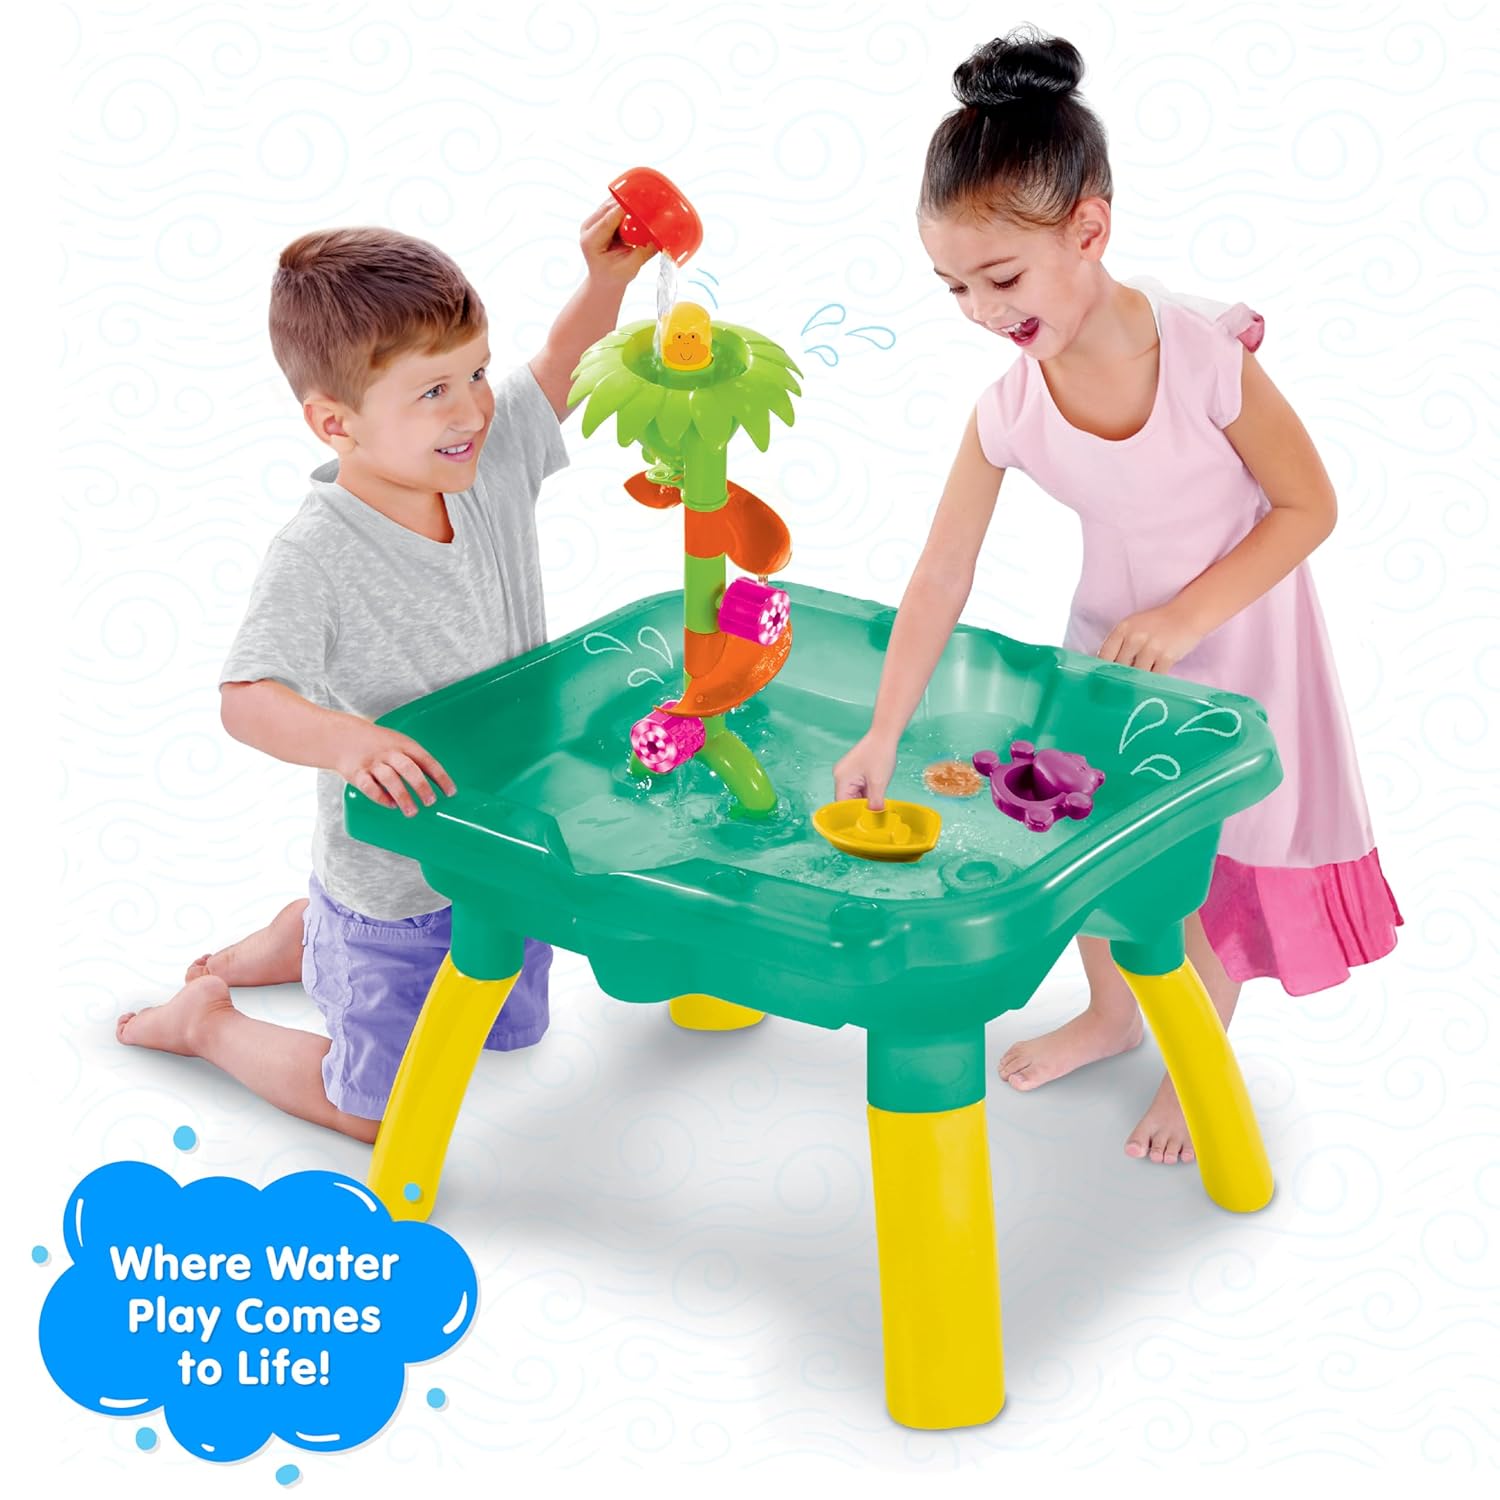 Funskool Giggles Splash n Fun Water Play Table, 10 Accessories for Water Fun Play, Ideal for pre-Schoolers, Multi-Colour